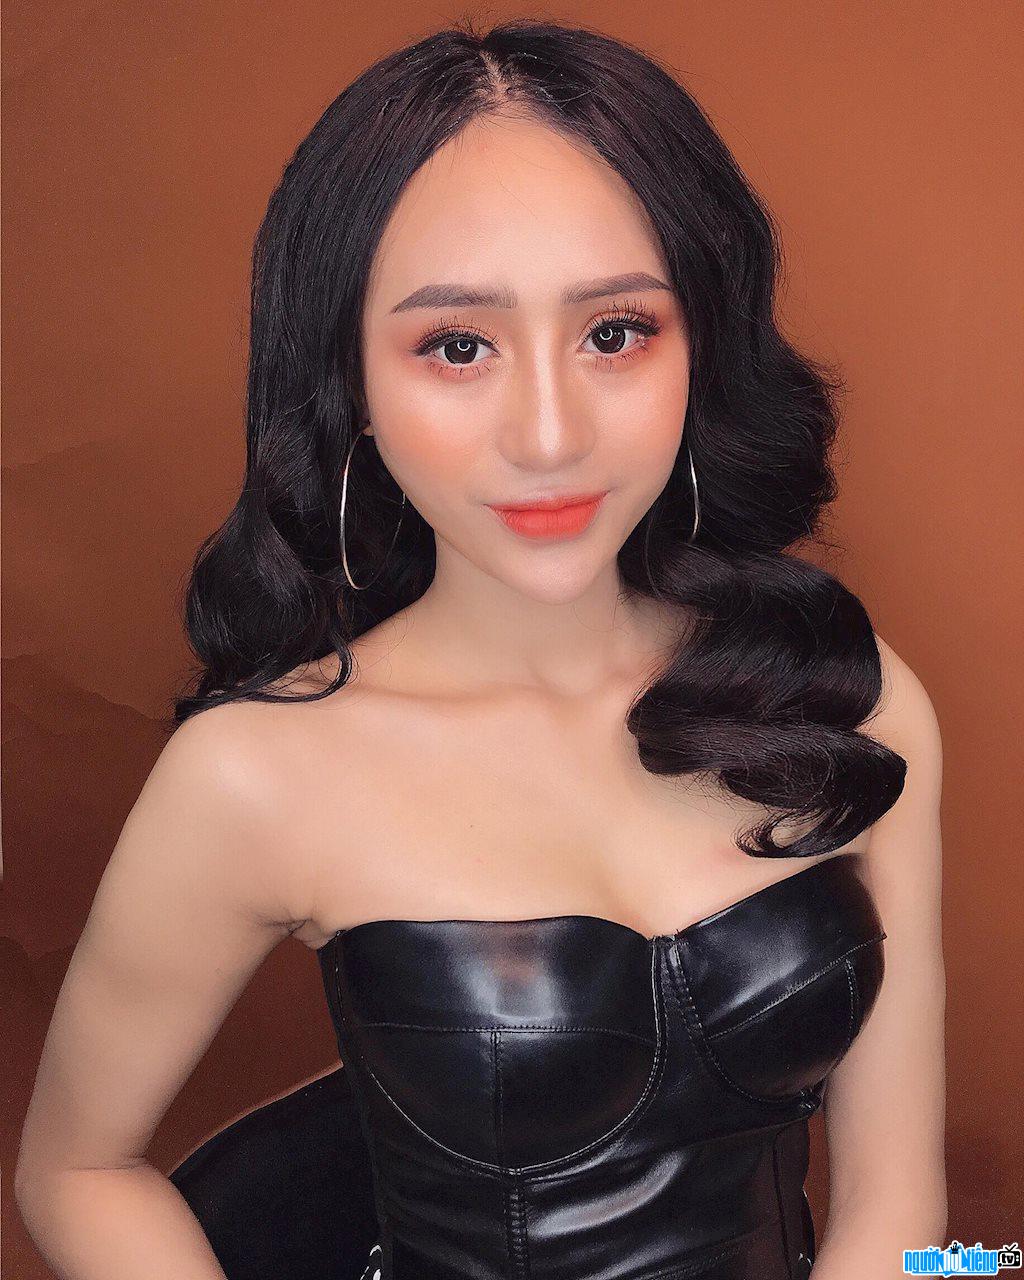  Hoai Linh with extremely sexy outfits